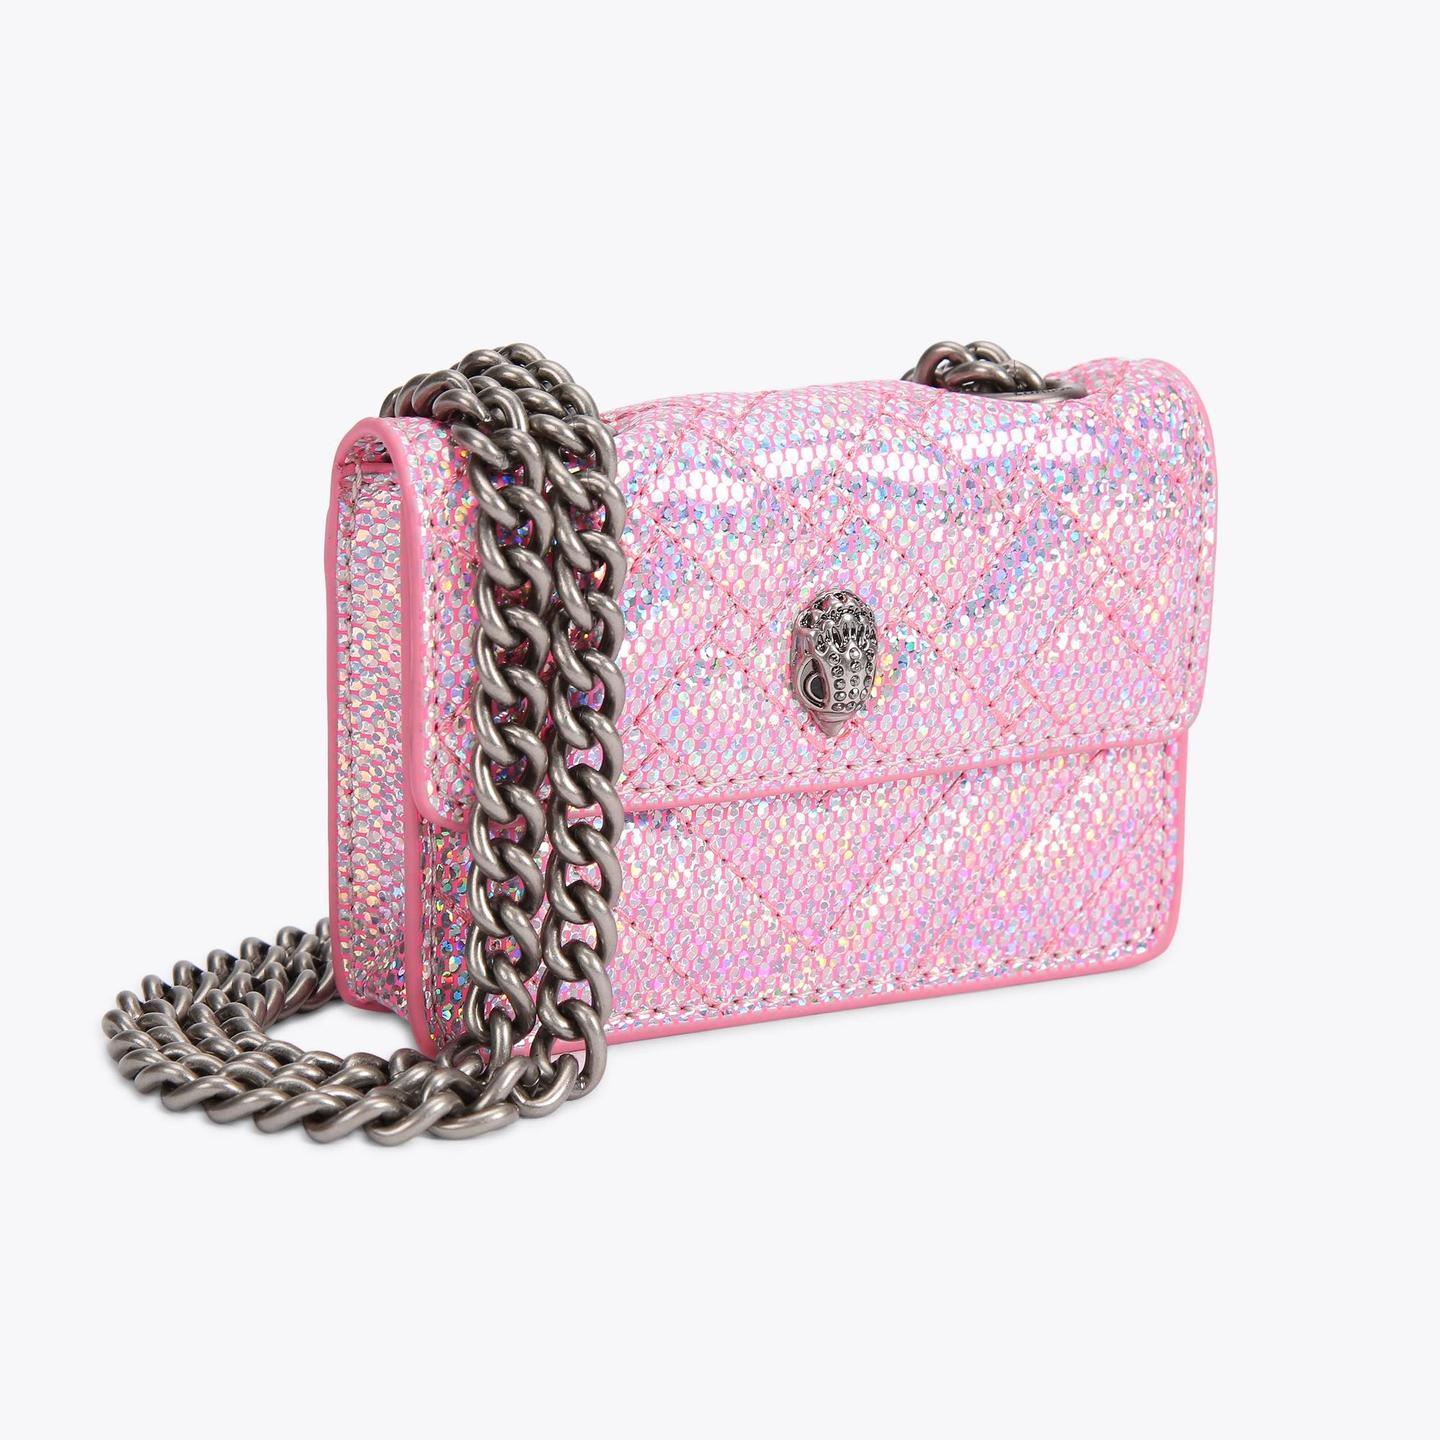 MICRO KENSINGTON Pink Shimmer Micro Quilted Cross Body Bag by KURT ...